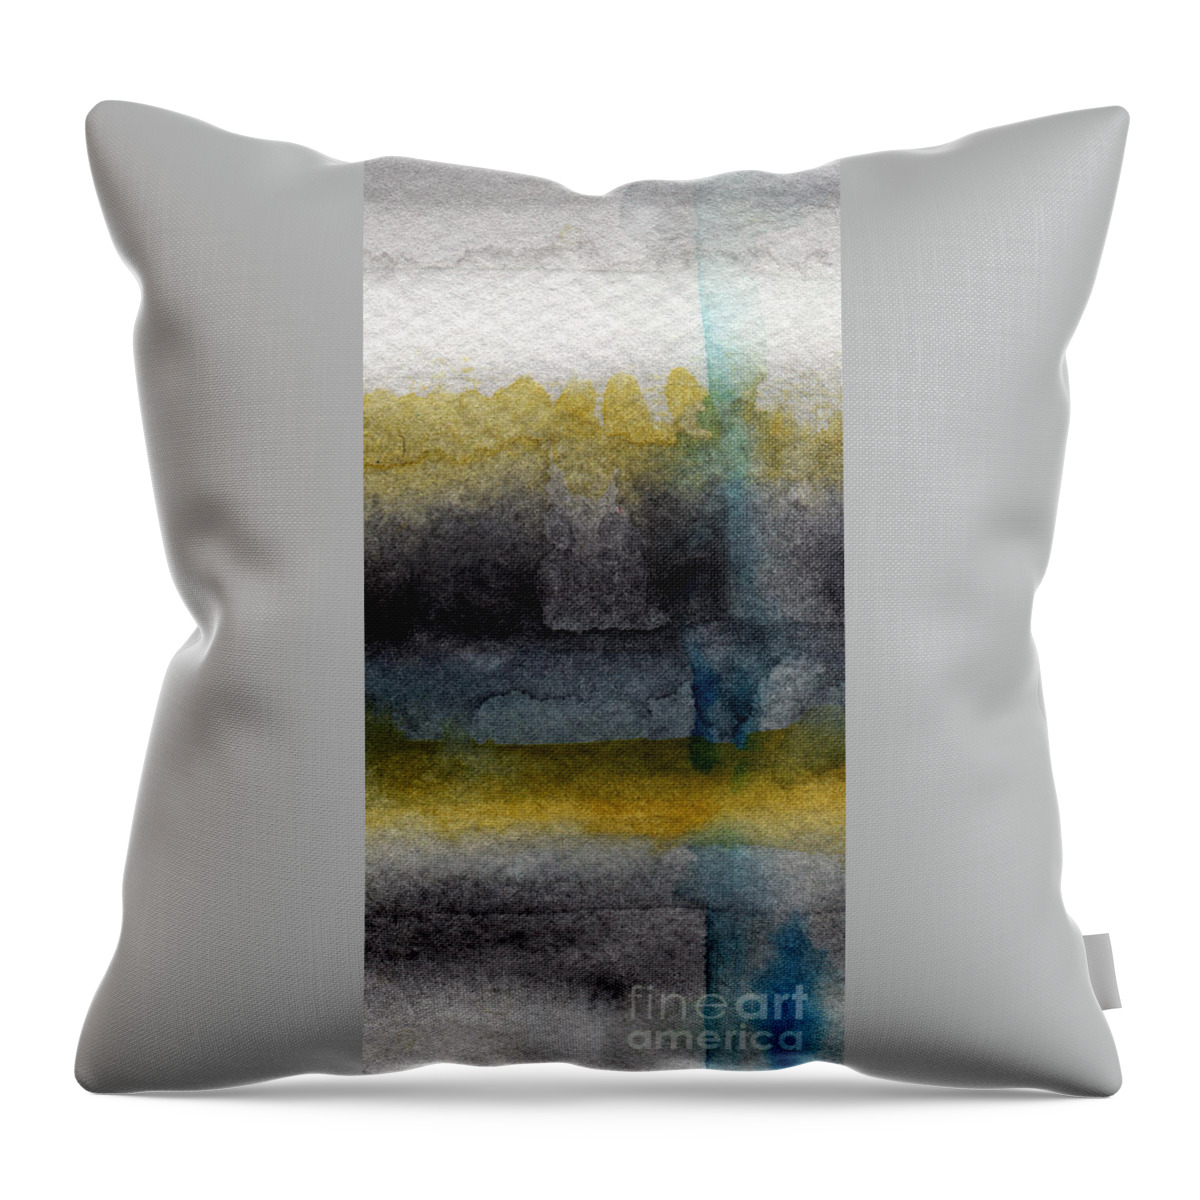 Abstract Throw Pillow featuring the painting Zen Moment by Linda Woods